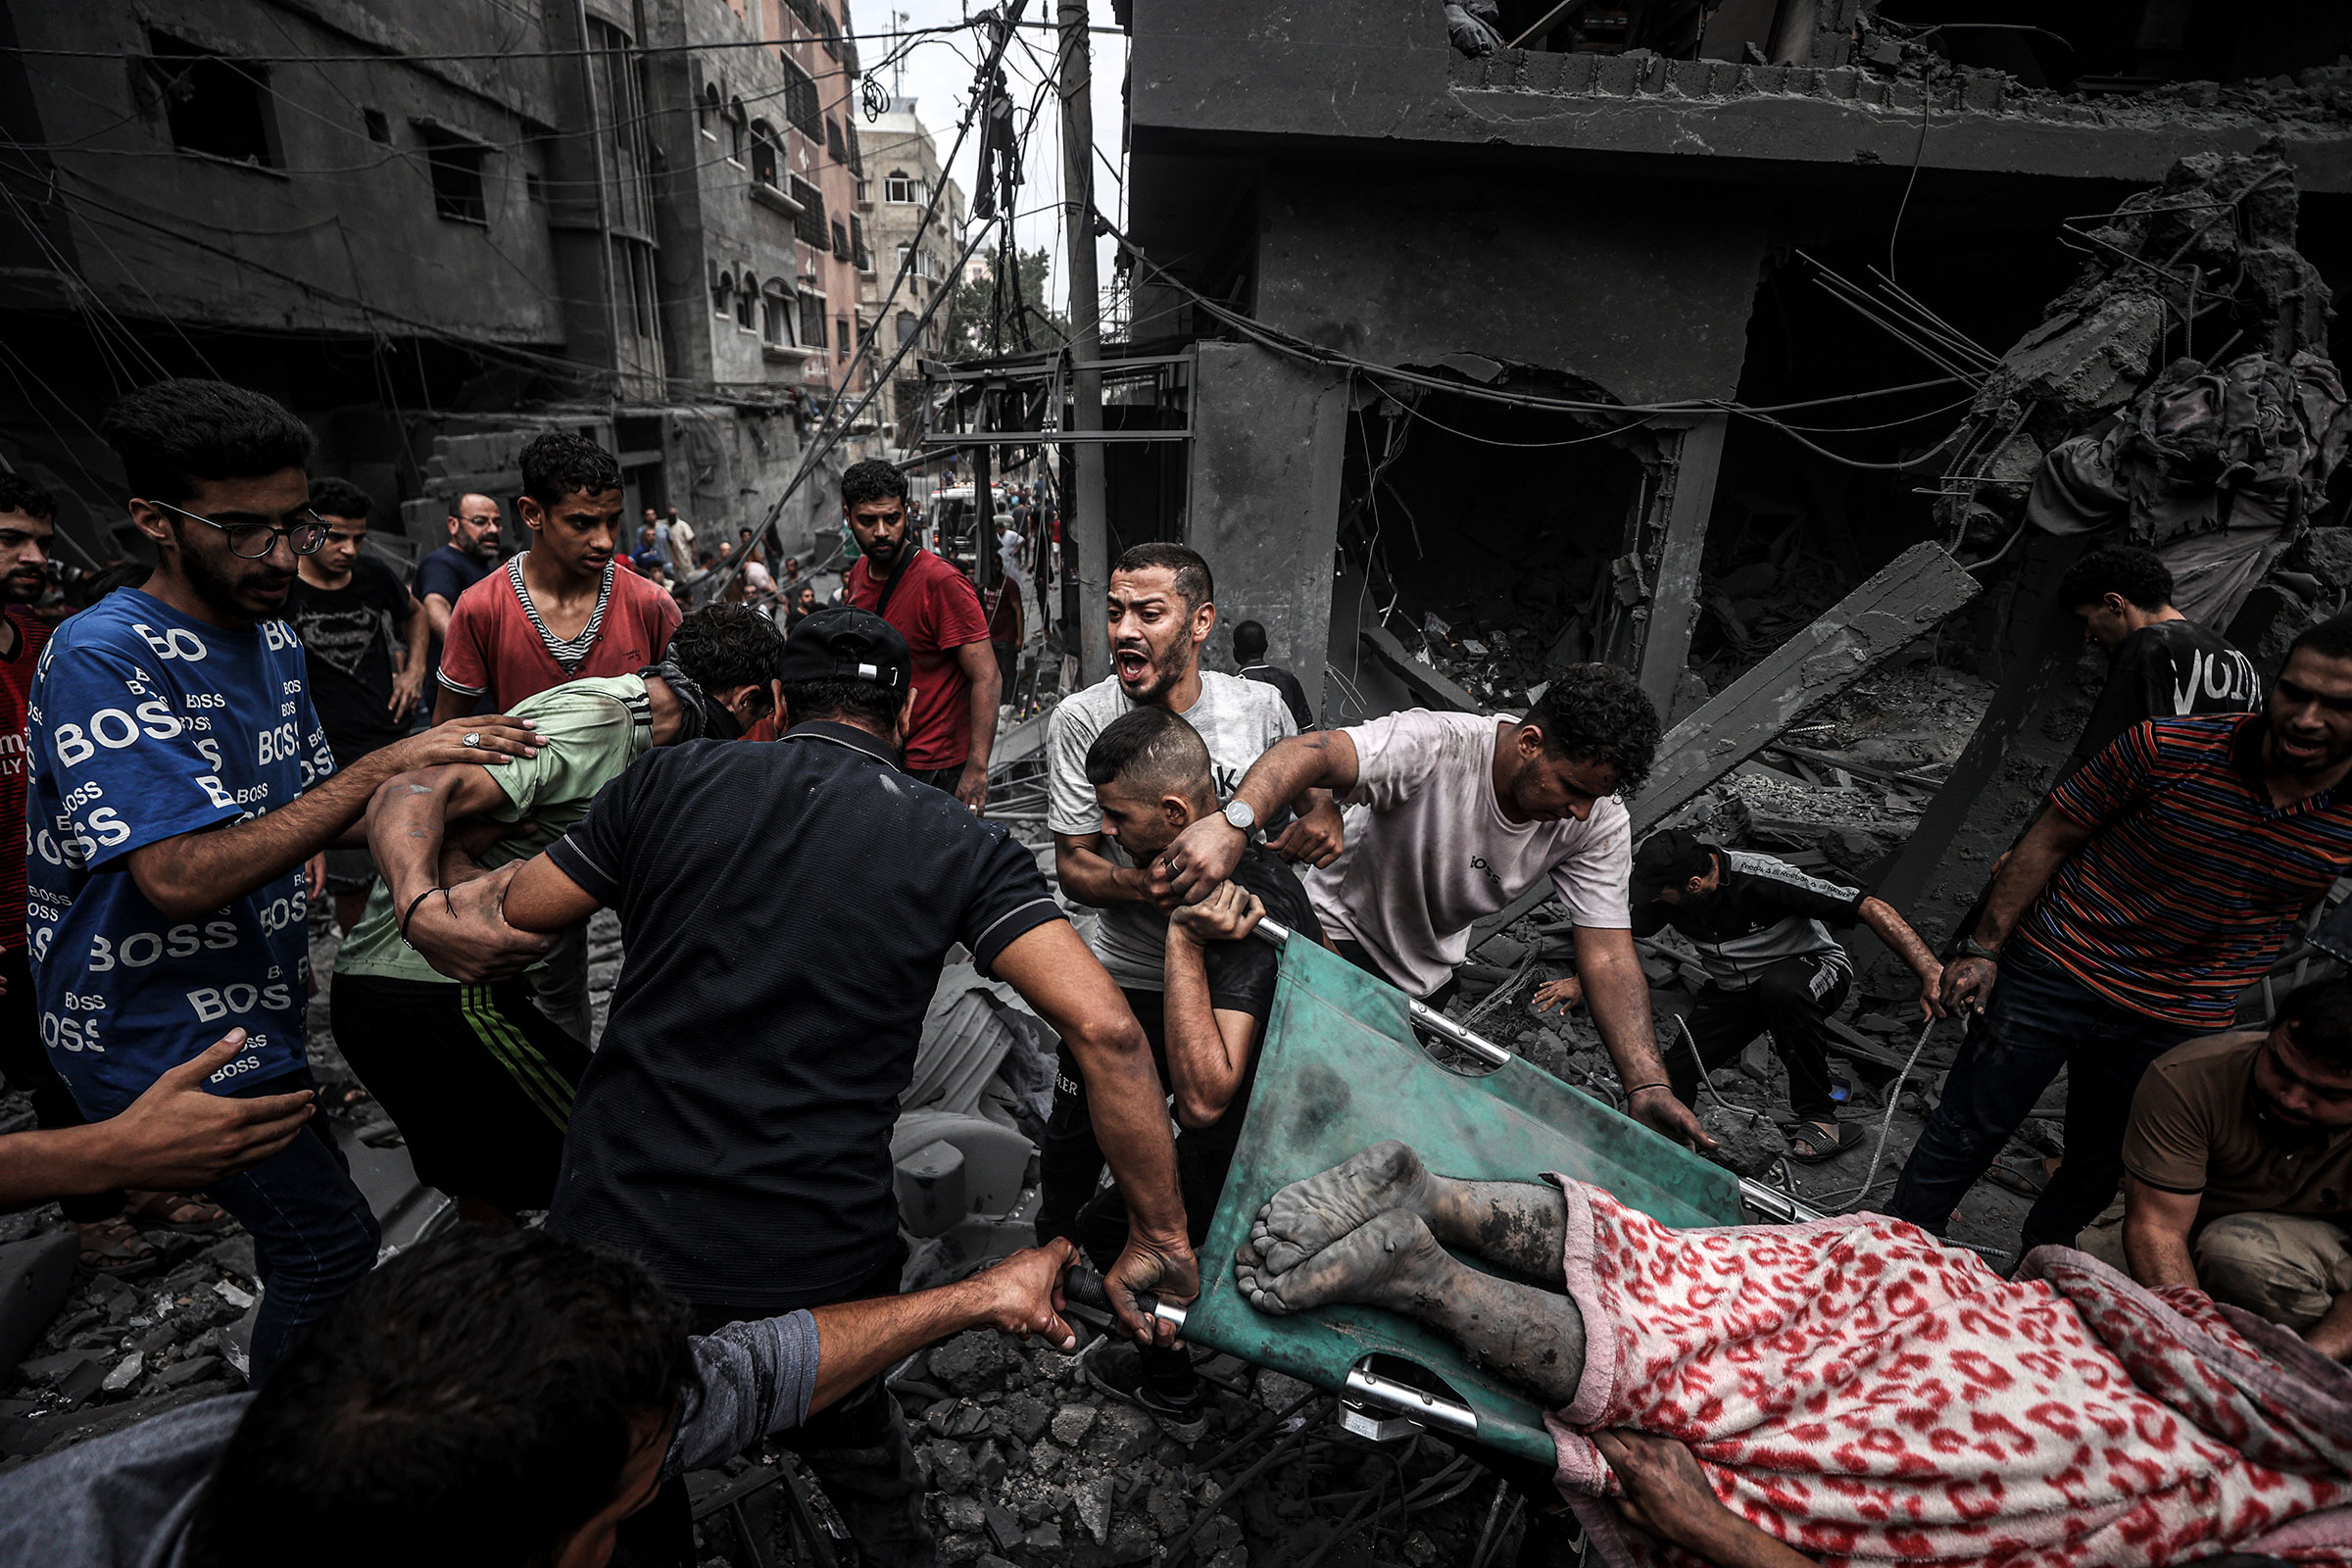 People carry injured and dead Palestinians from the rubbles of buildings as civil defense teams and civilians conduct search and rescue operations after Israeli attacks on Al-Shati refugee camp in Gaza City, on Oct. 27.